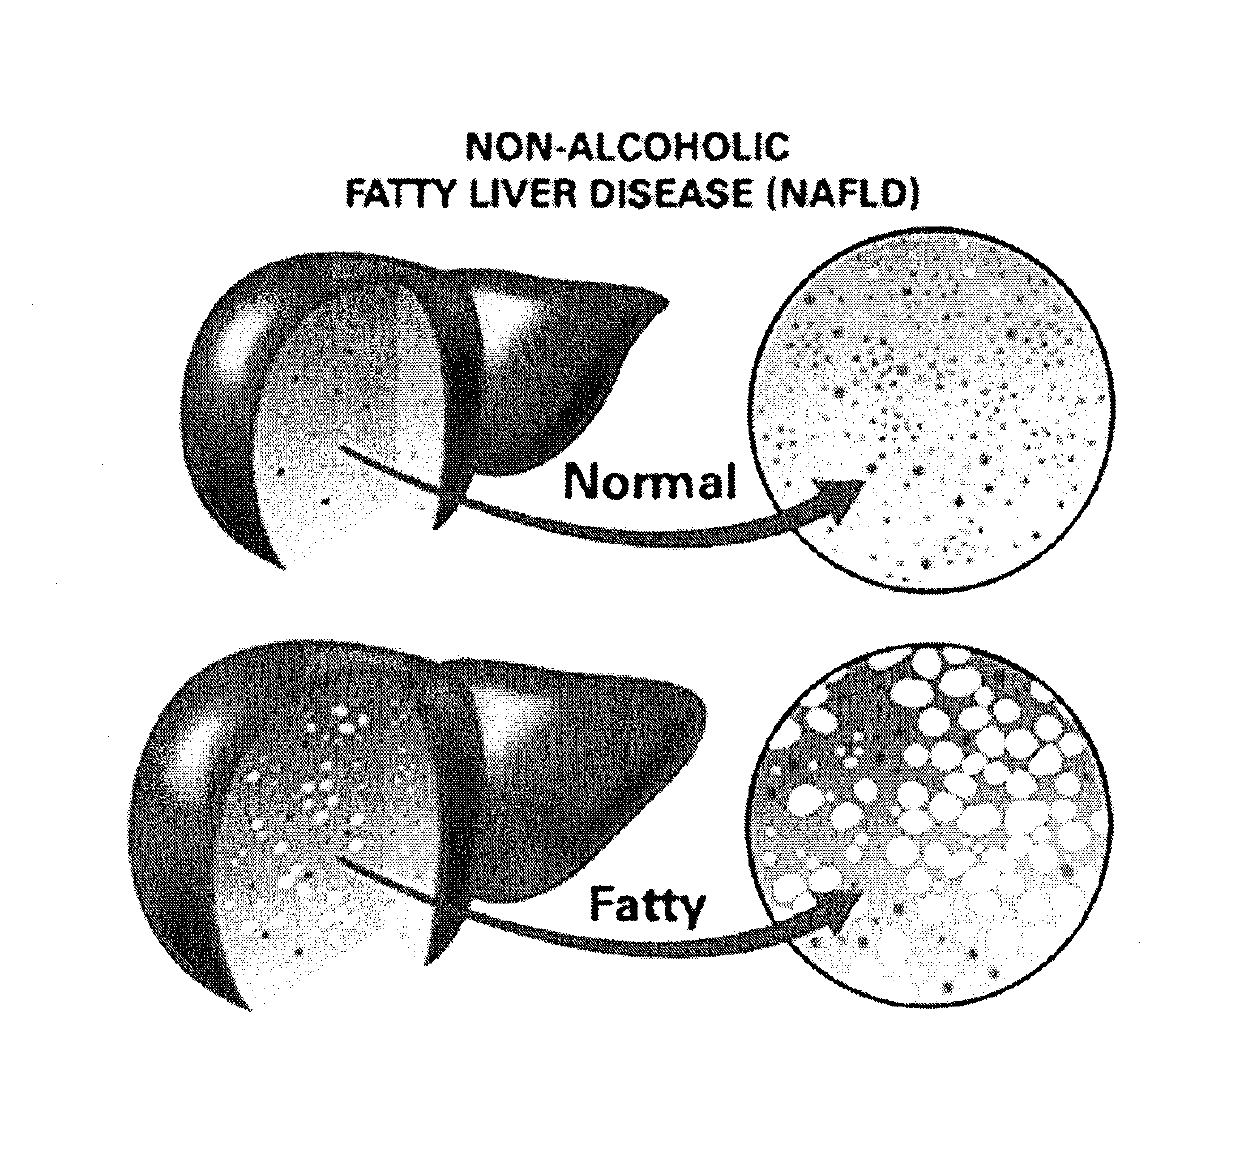 Method and system for reducing the likelihood of developing liver cancer in an individual diagnosed with non-alcoholic fatty liver disease